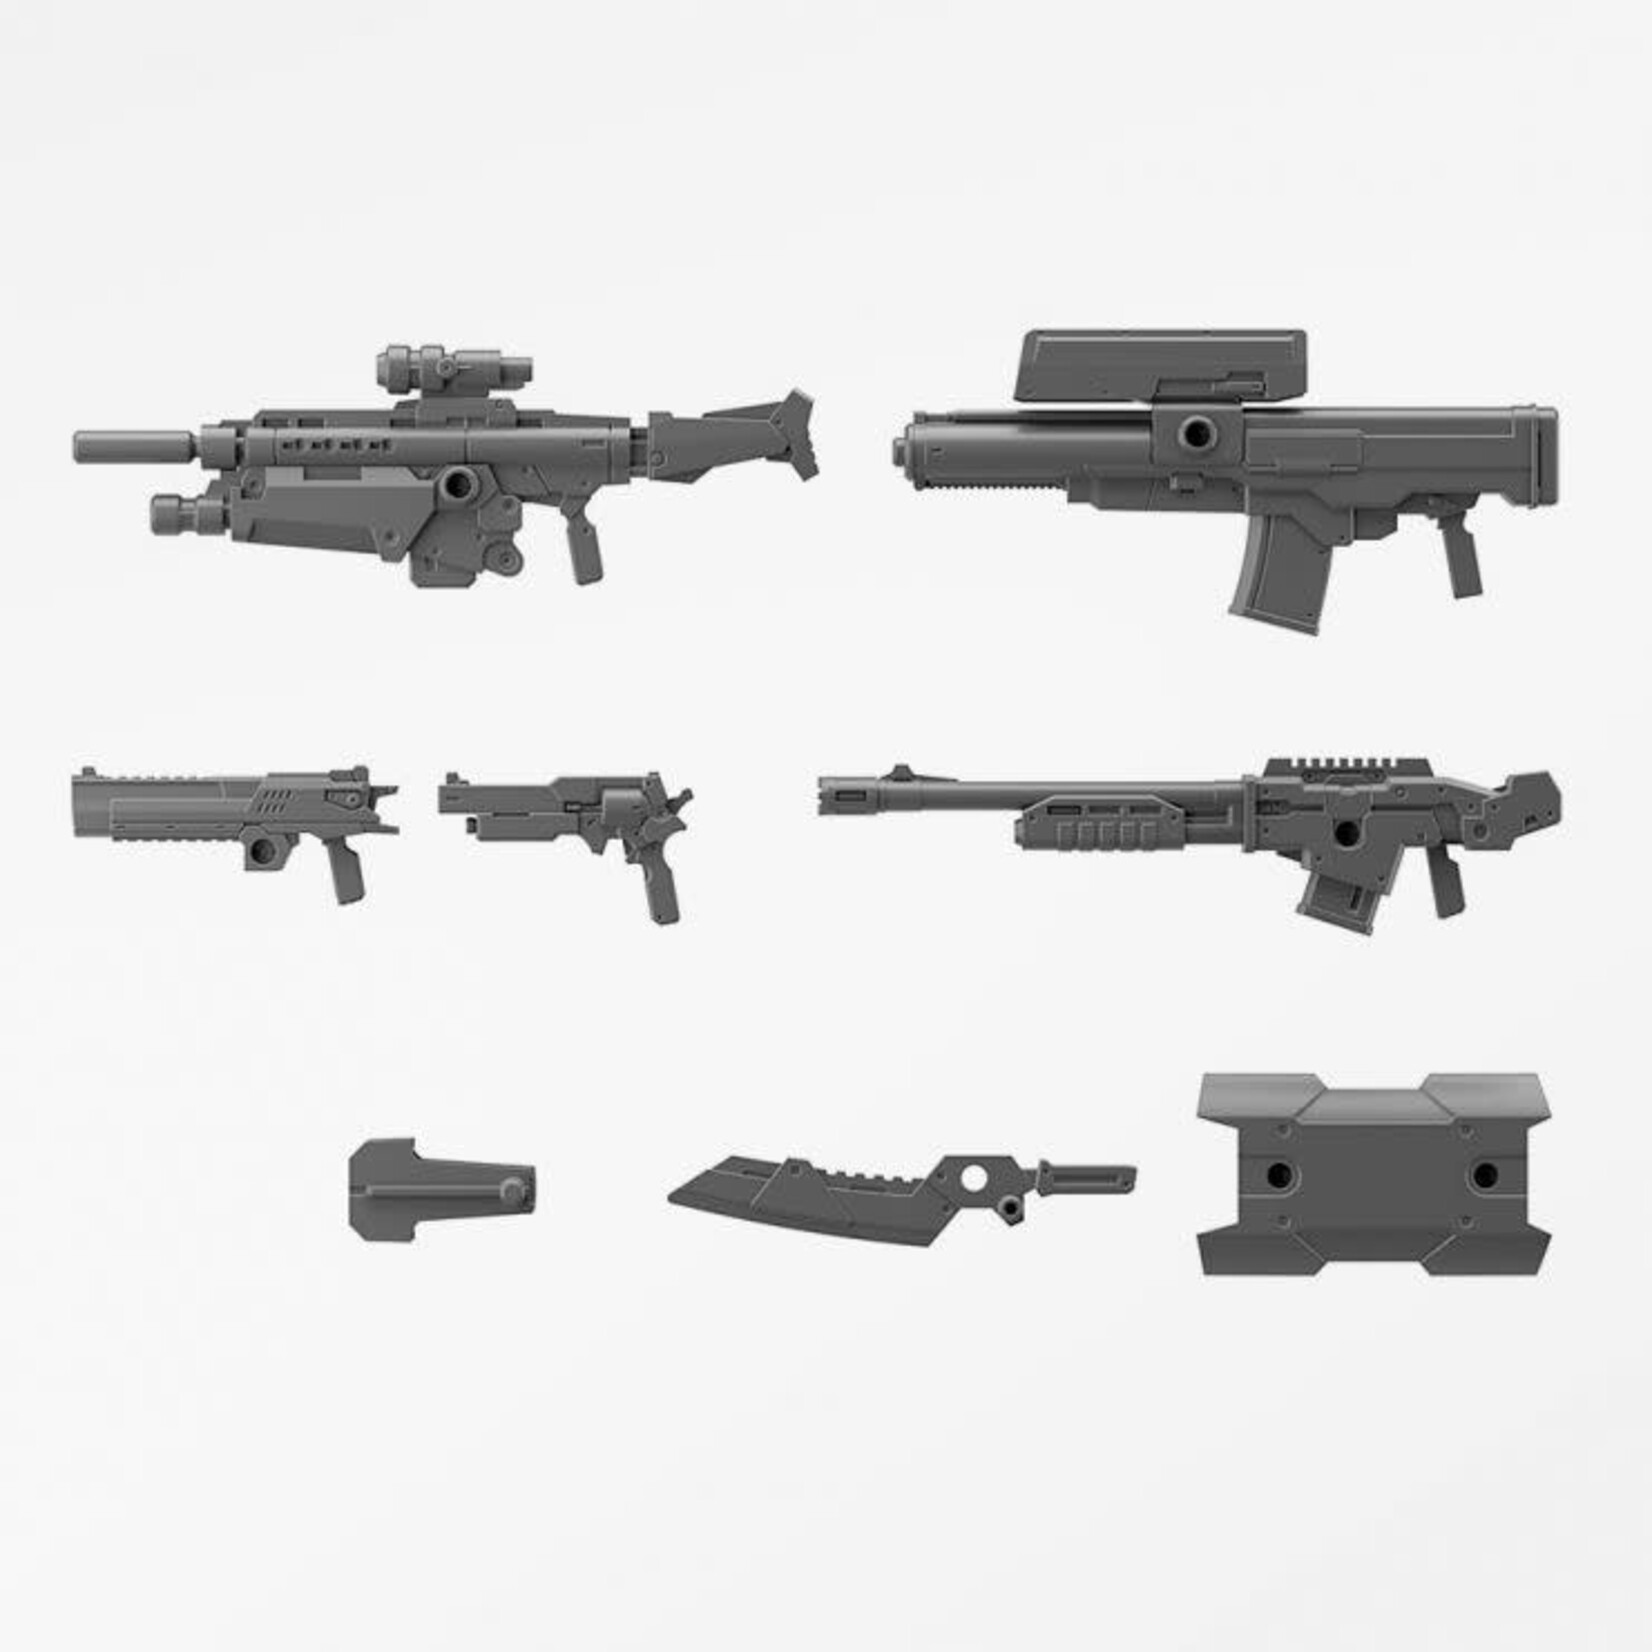 Bandai Bandai 2616282 30MM #20 Customize Weapons (Military Weapon) "30 Minute Missions" 30 MM Weapon